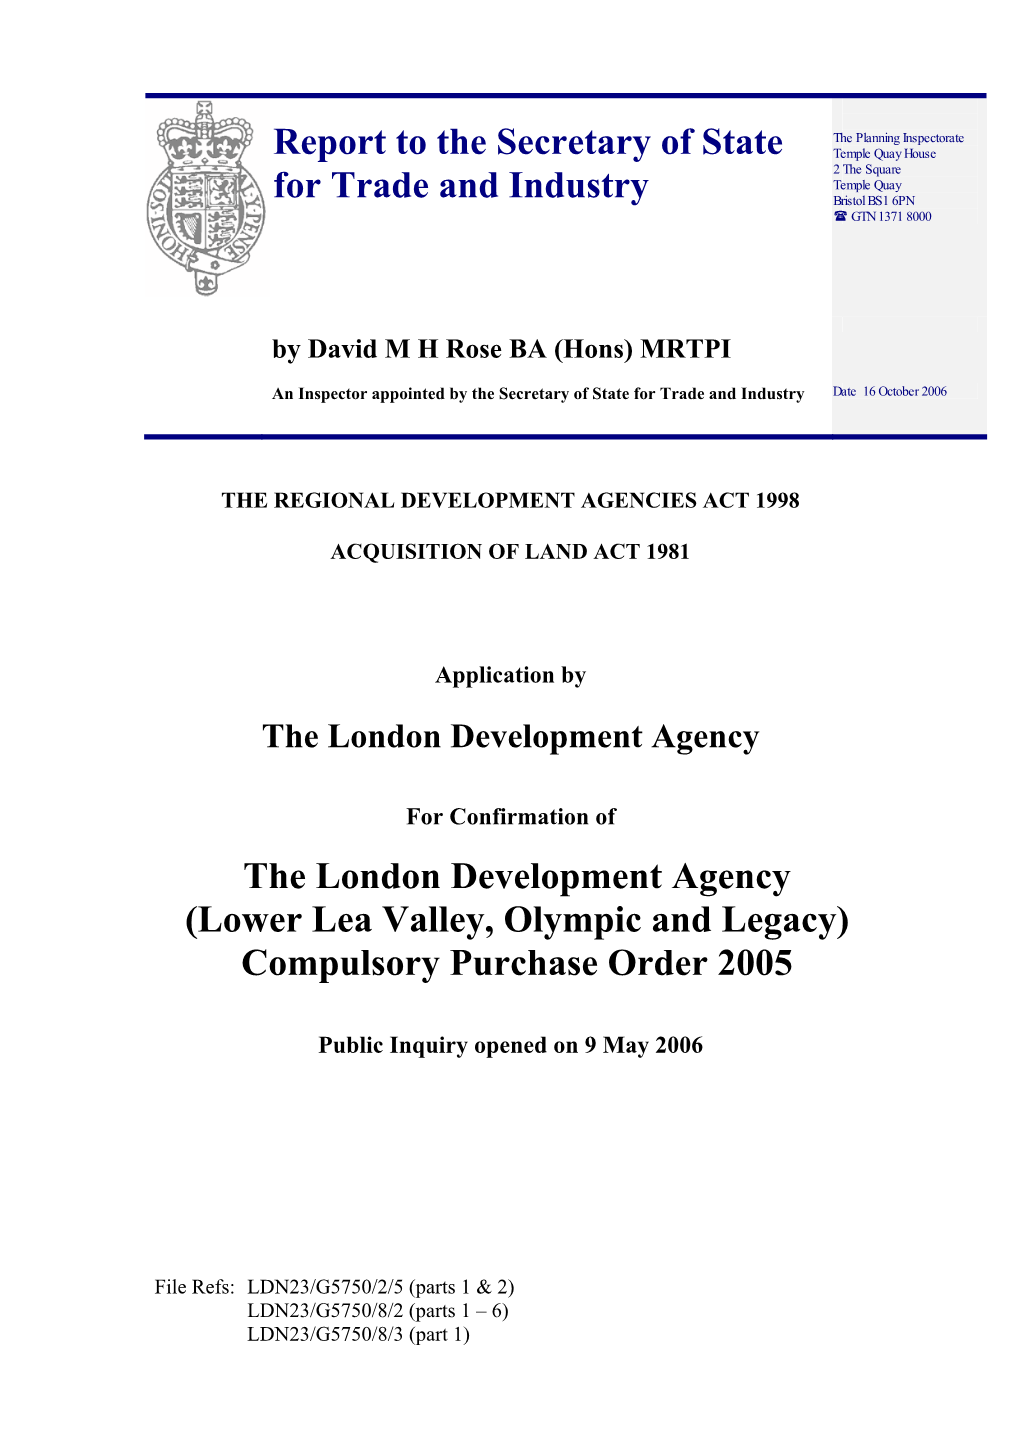 (Lower Lea Valley, Olympic and Legacy) Compulsory Purchase Order 2005